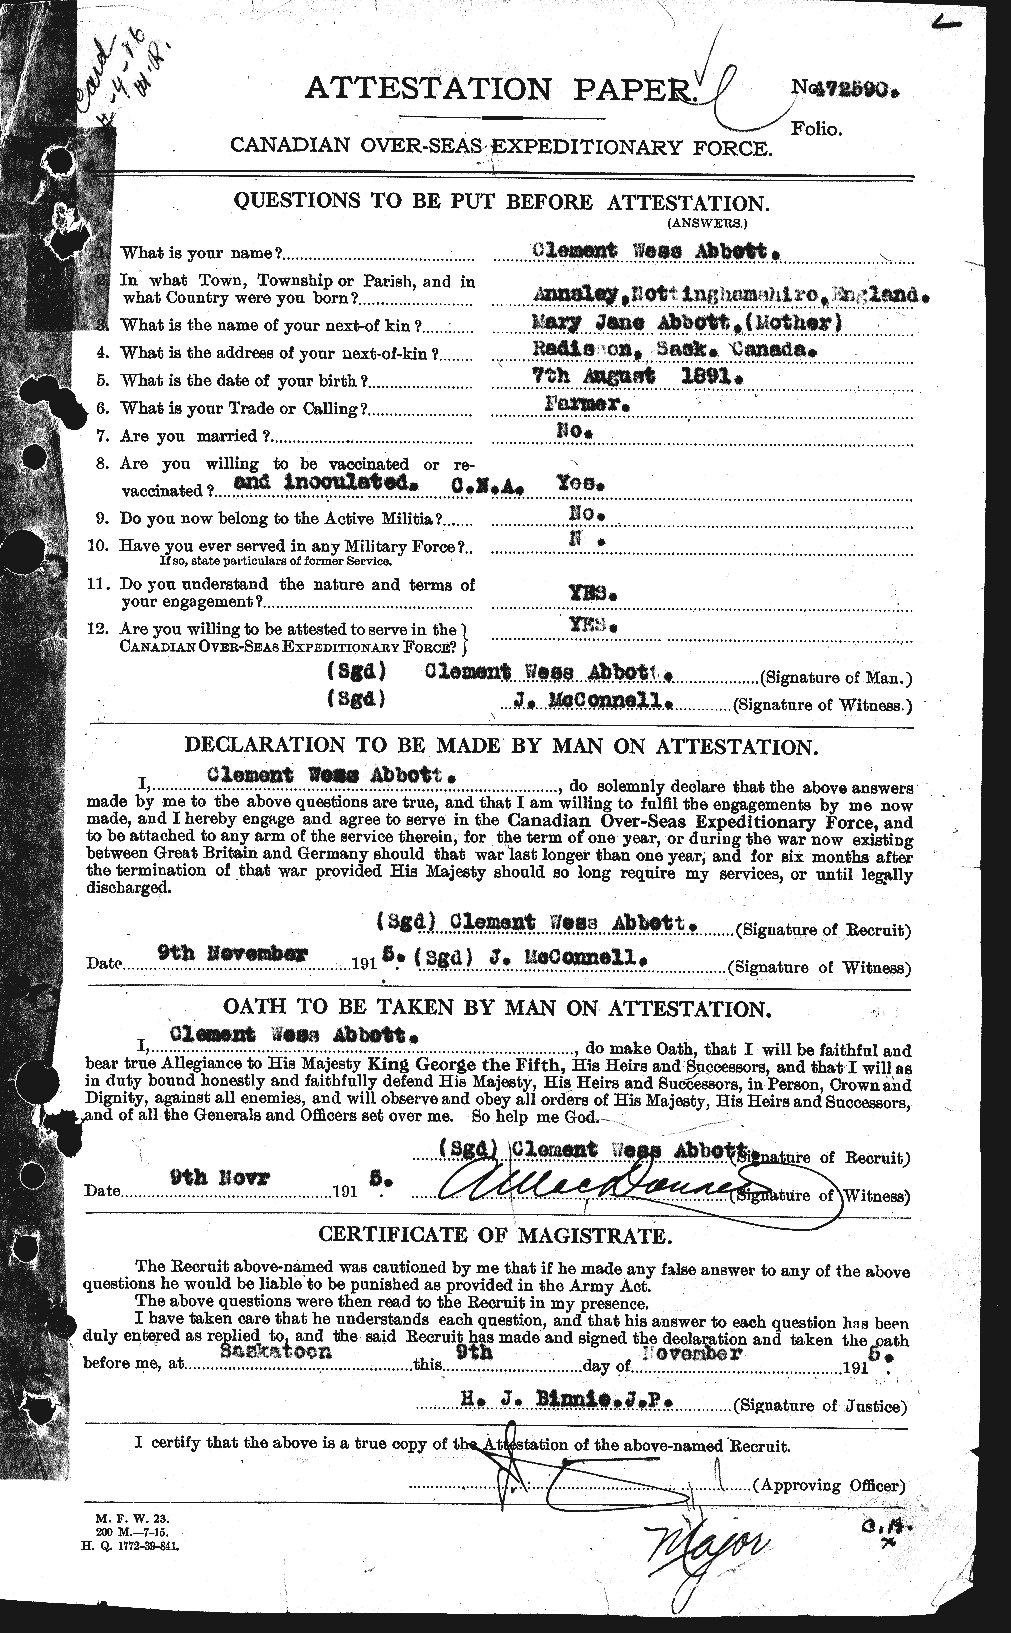 Personnel Records of the First World War - CEF 200896a